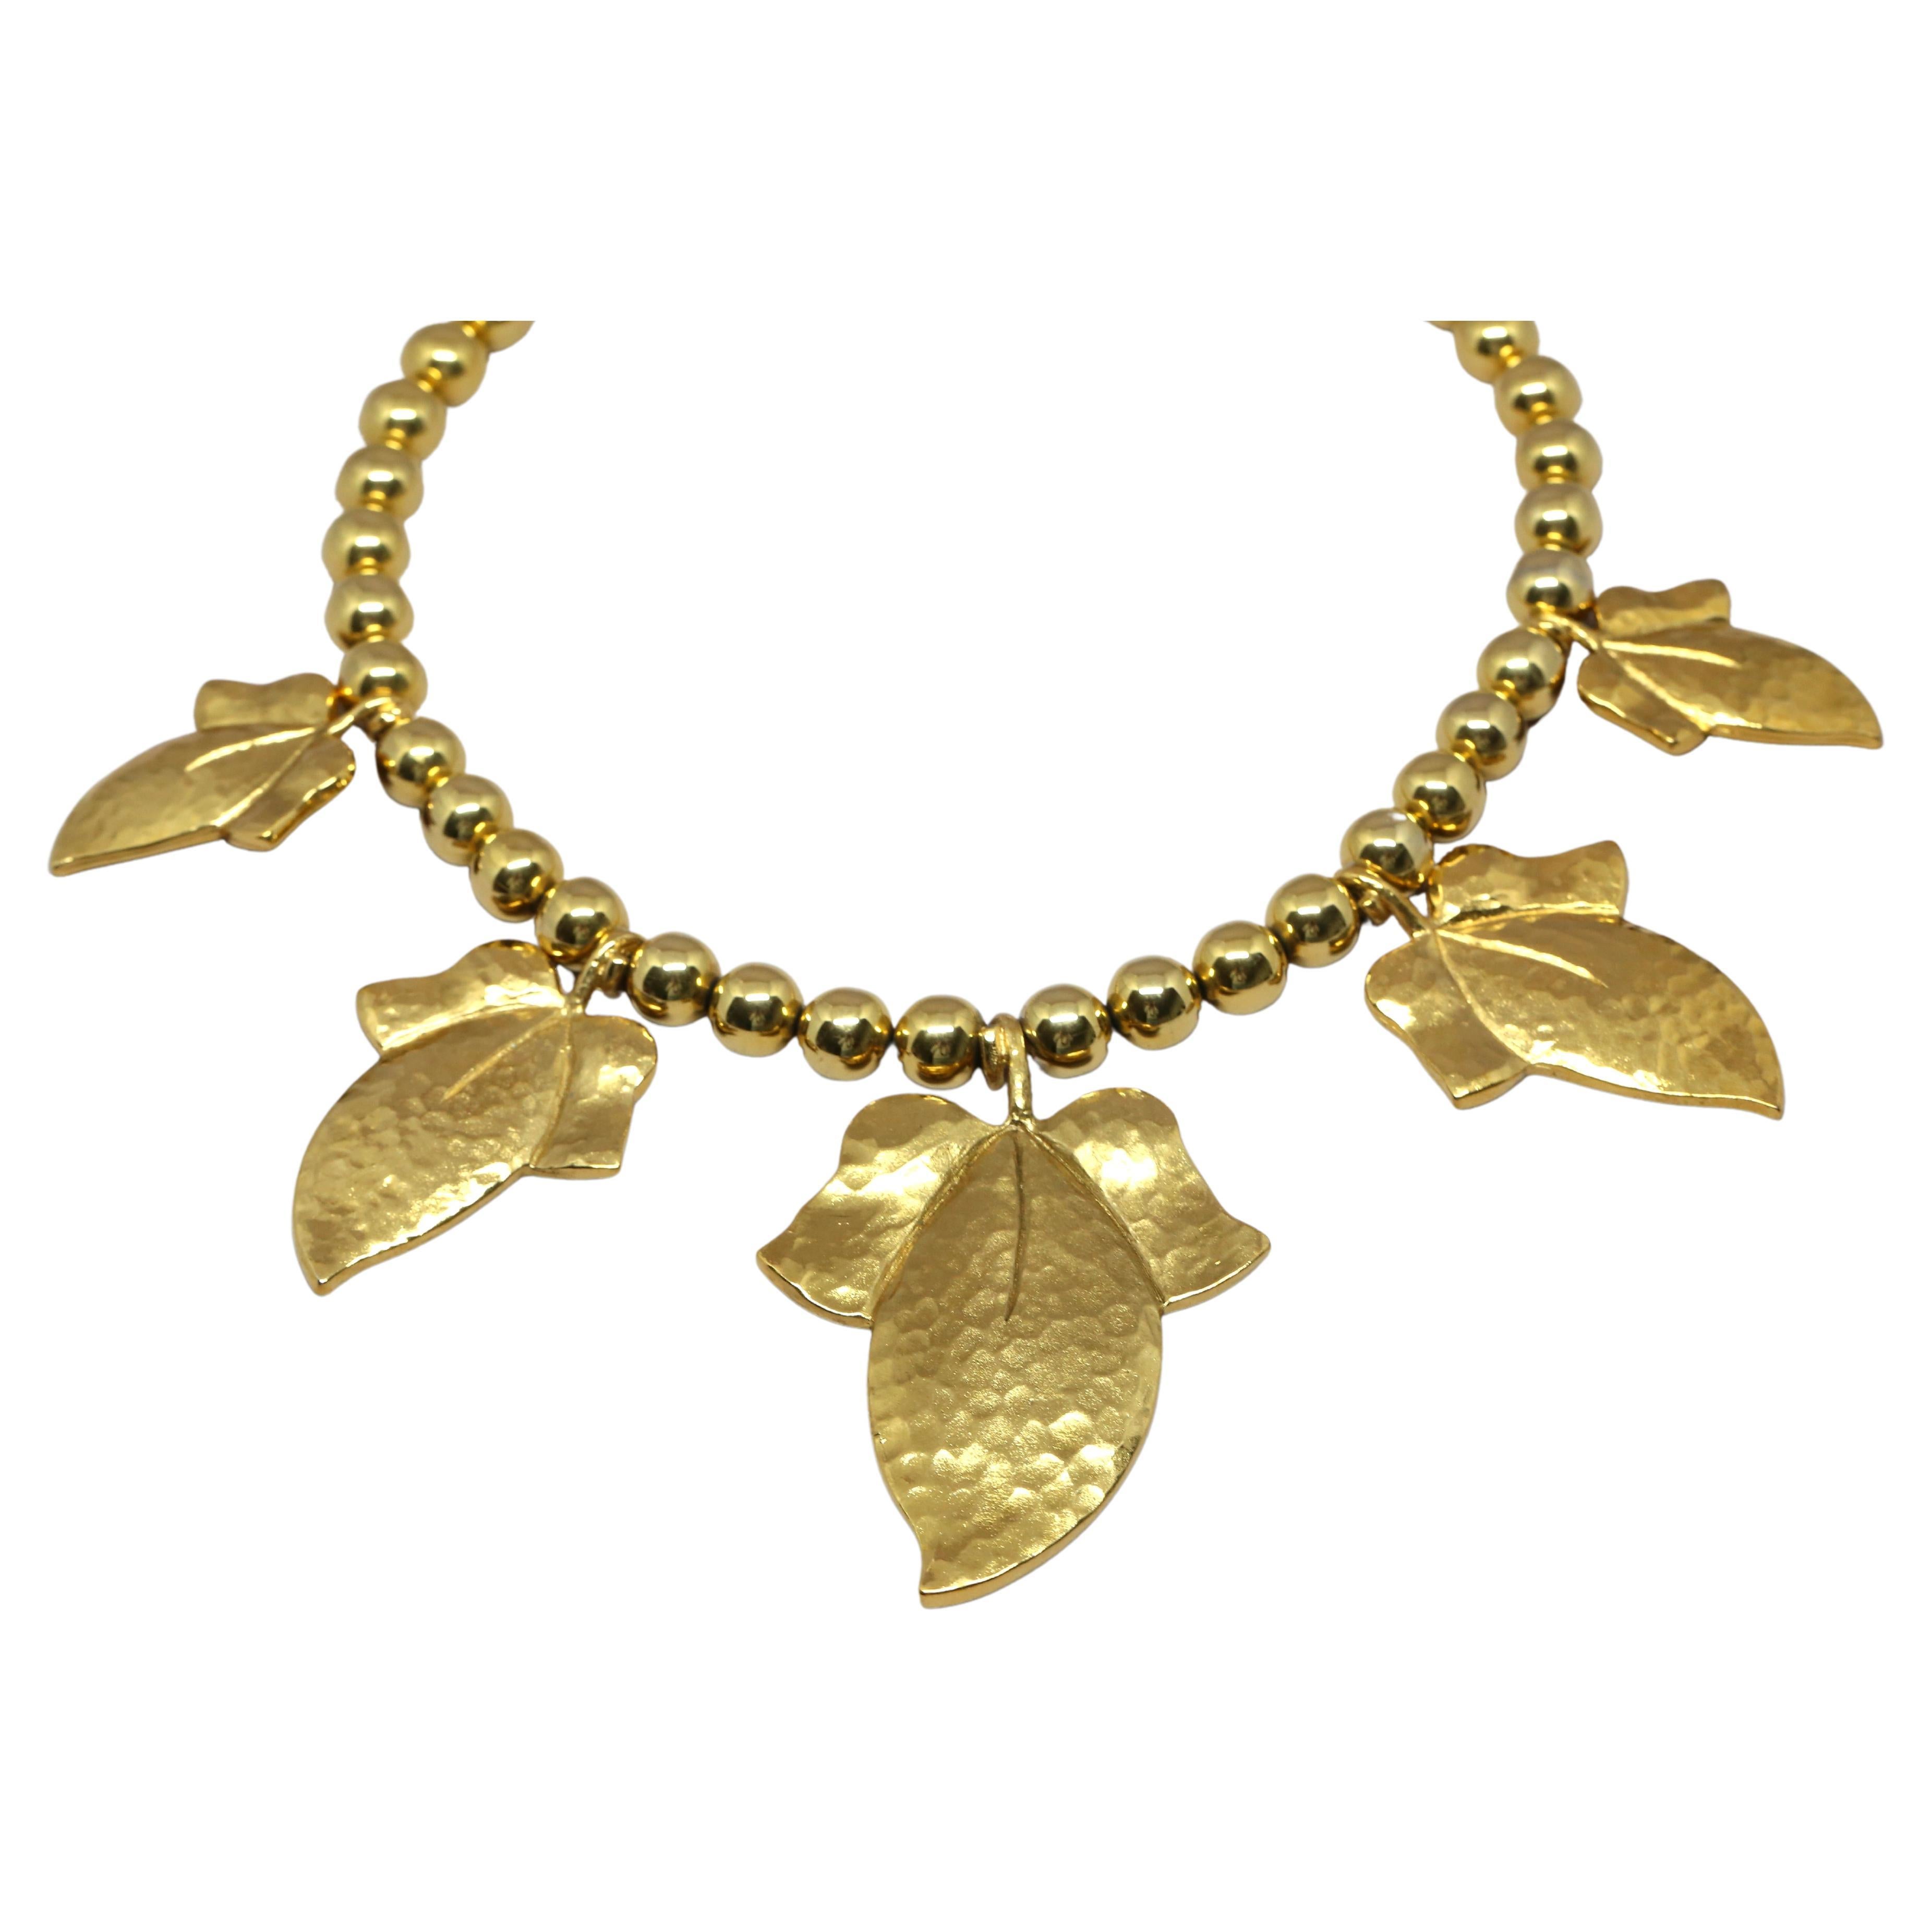 Oversized, gilt beaded necklace with hammered leaf charms from Yves Saint Laurent dating to the 1990's.  Adjustable heart toggle closure from approximately 16-18